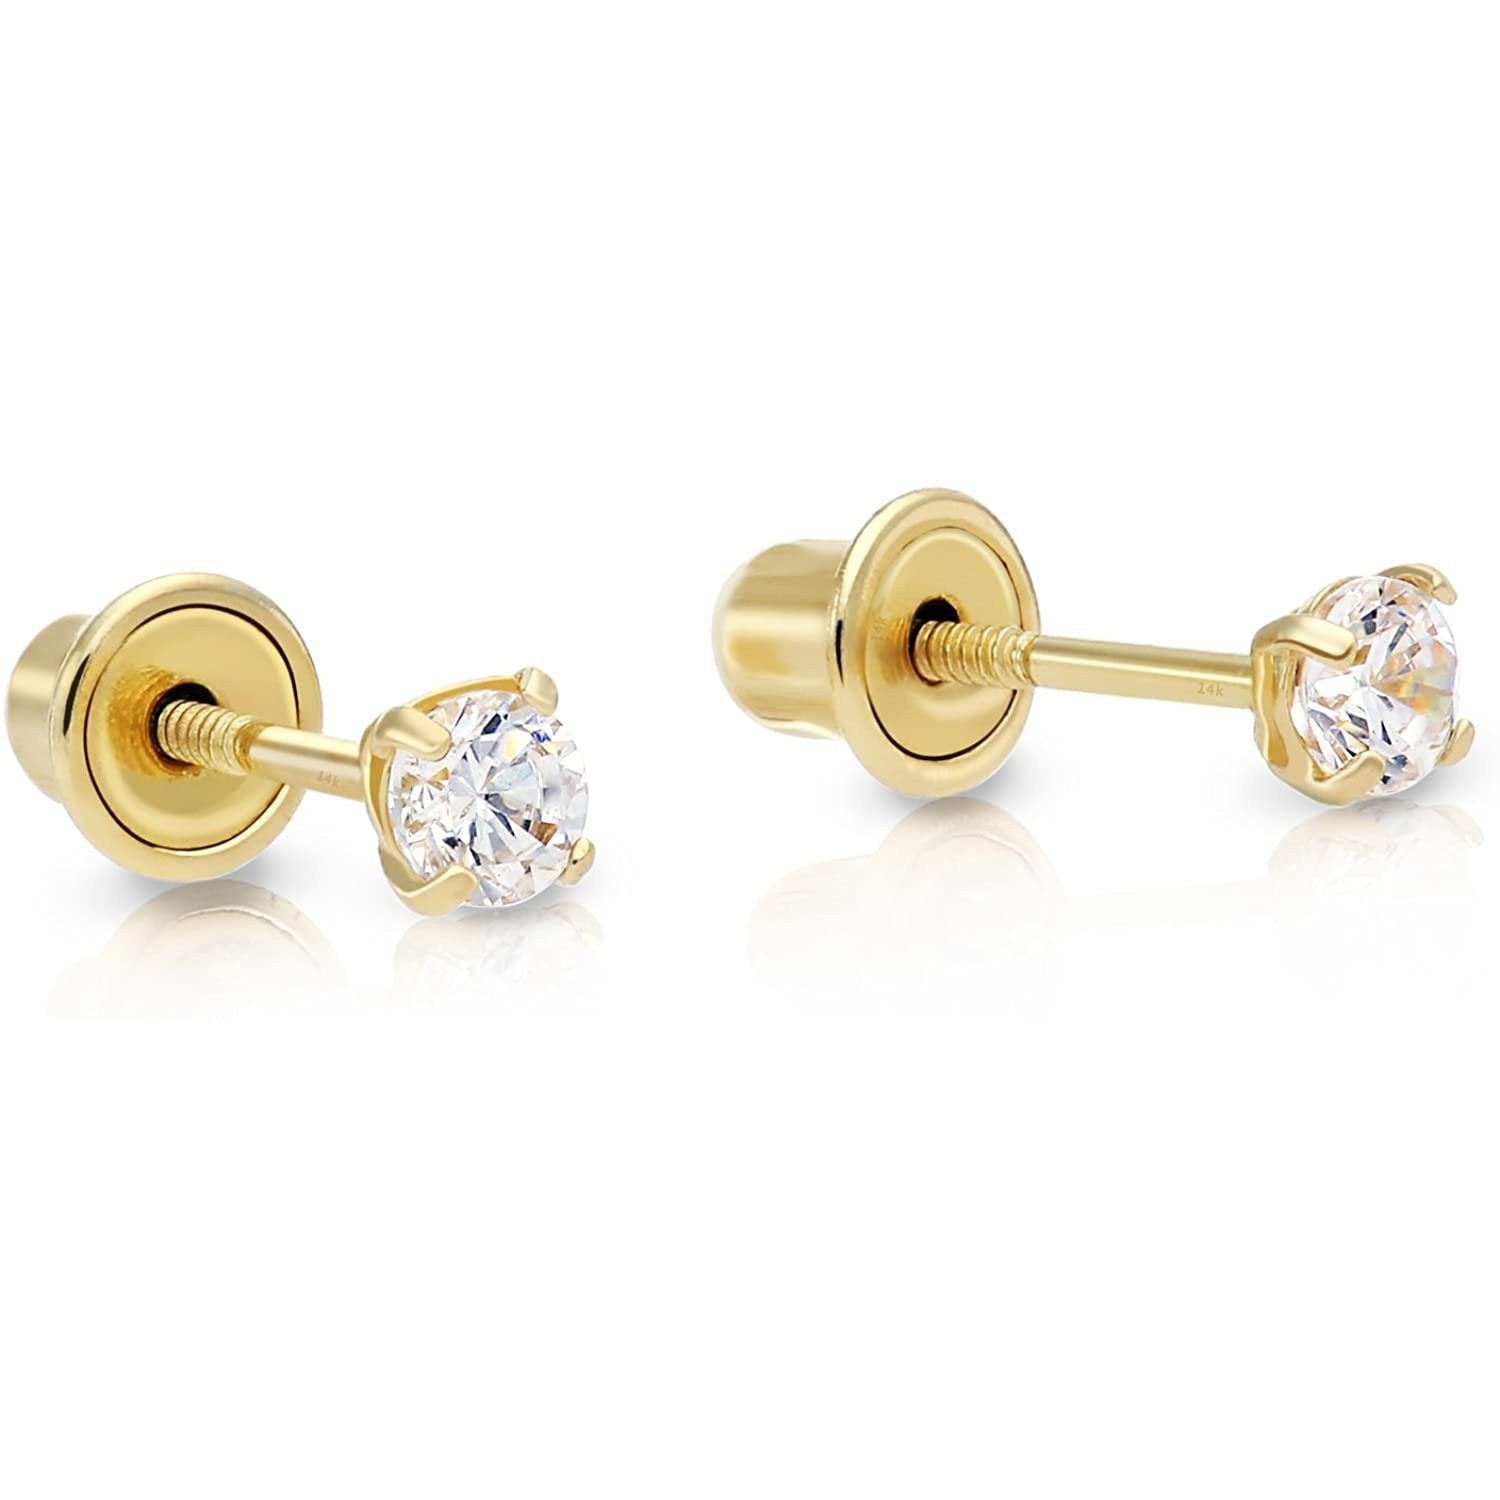 14k Yellow Gold 6 mm Replacement Earring Backs (1 Pair)